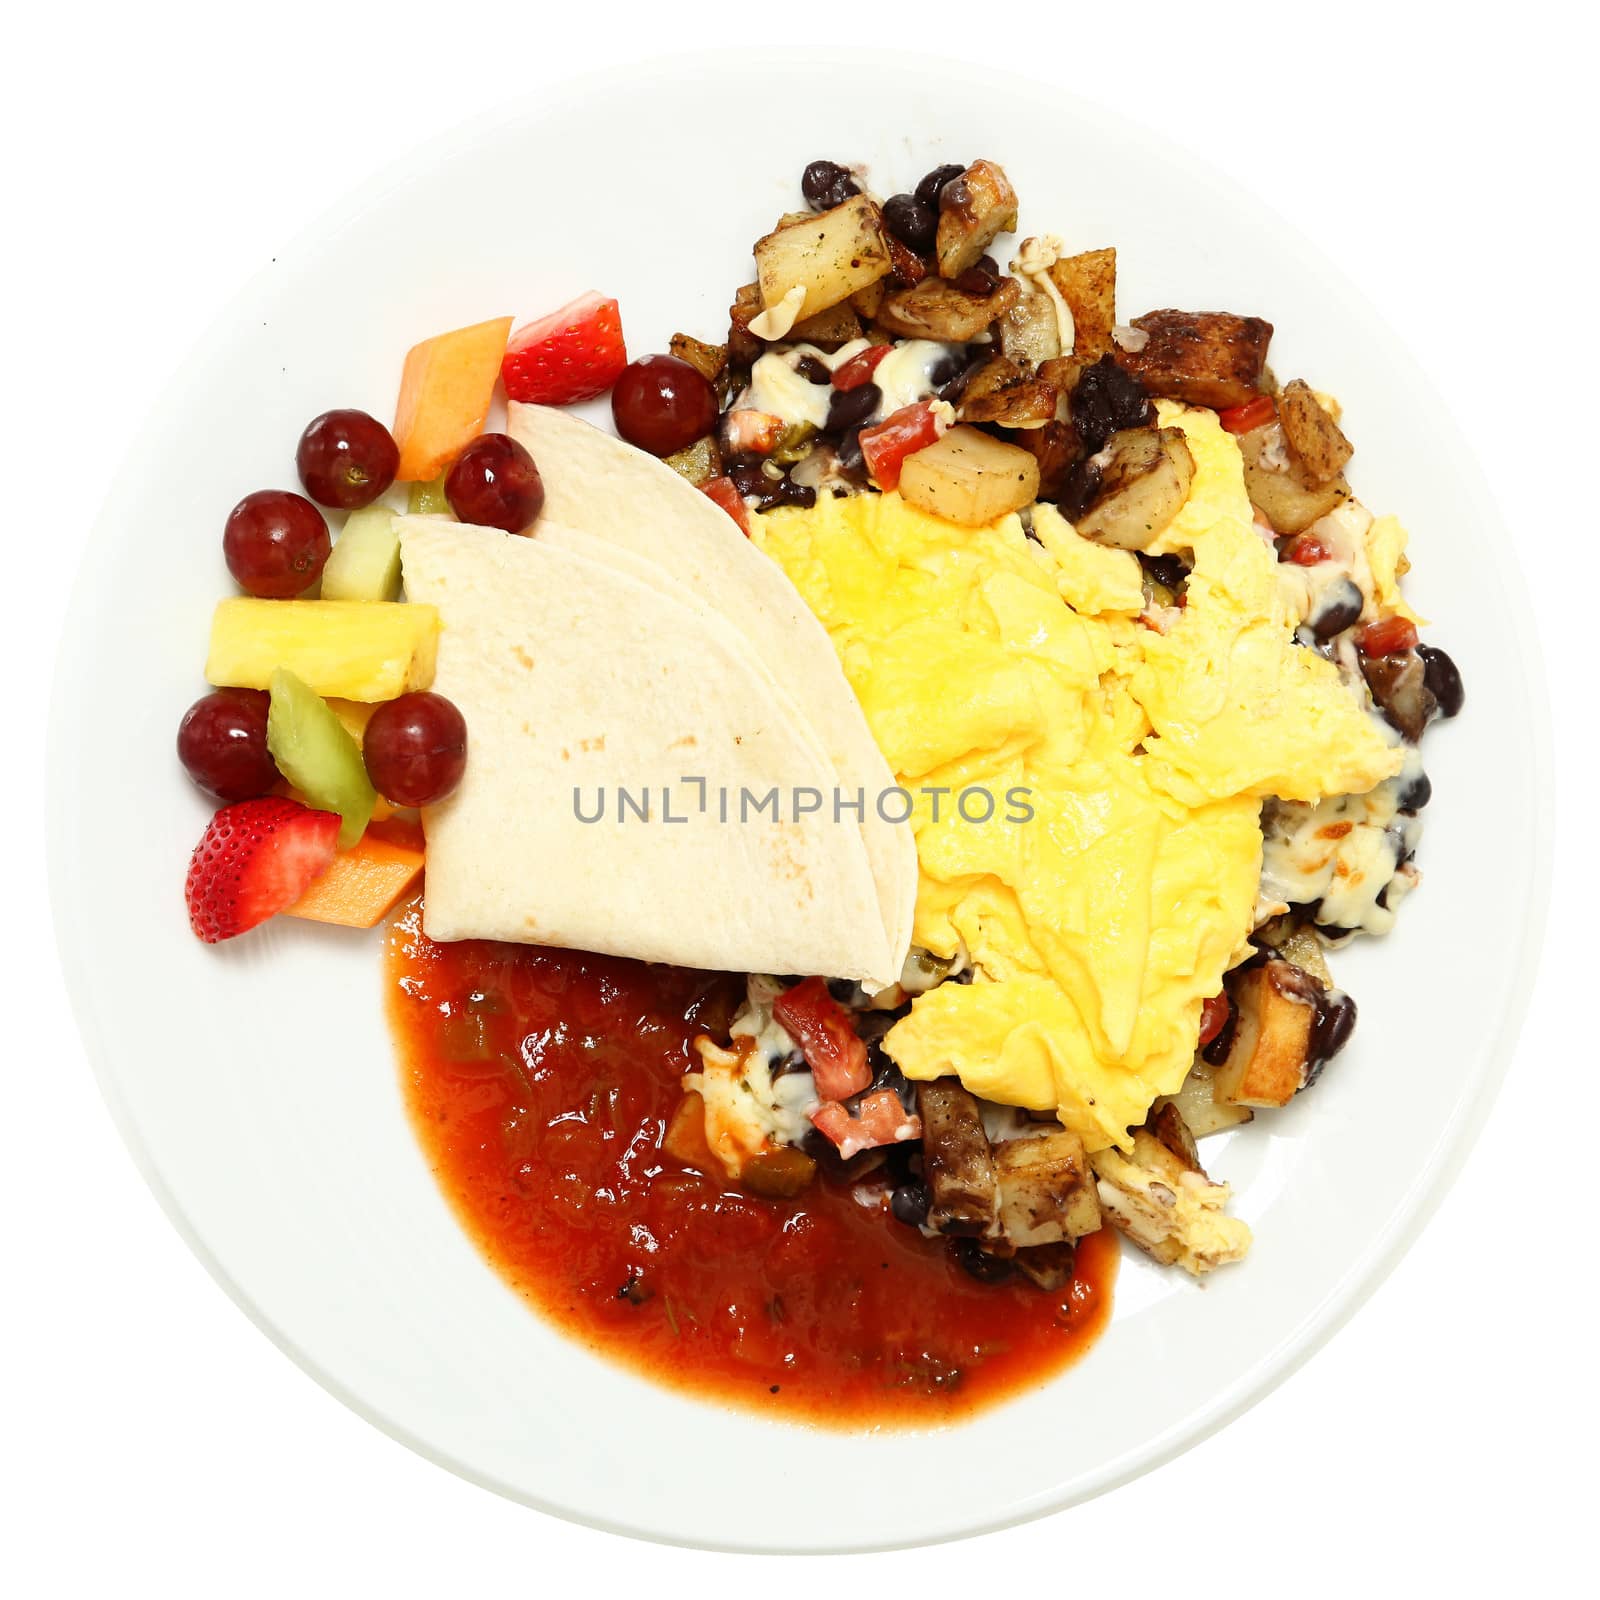 Mexican Eggs with Salsa, Potatoes, Fruit by duplass